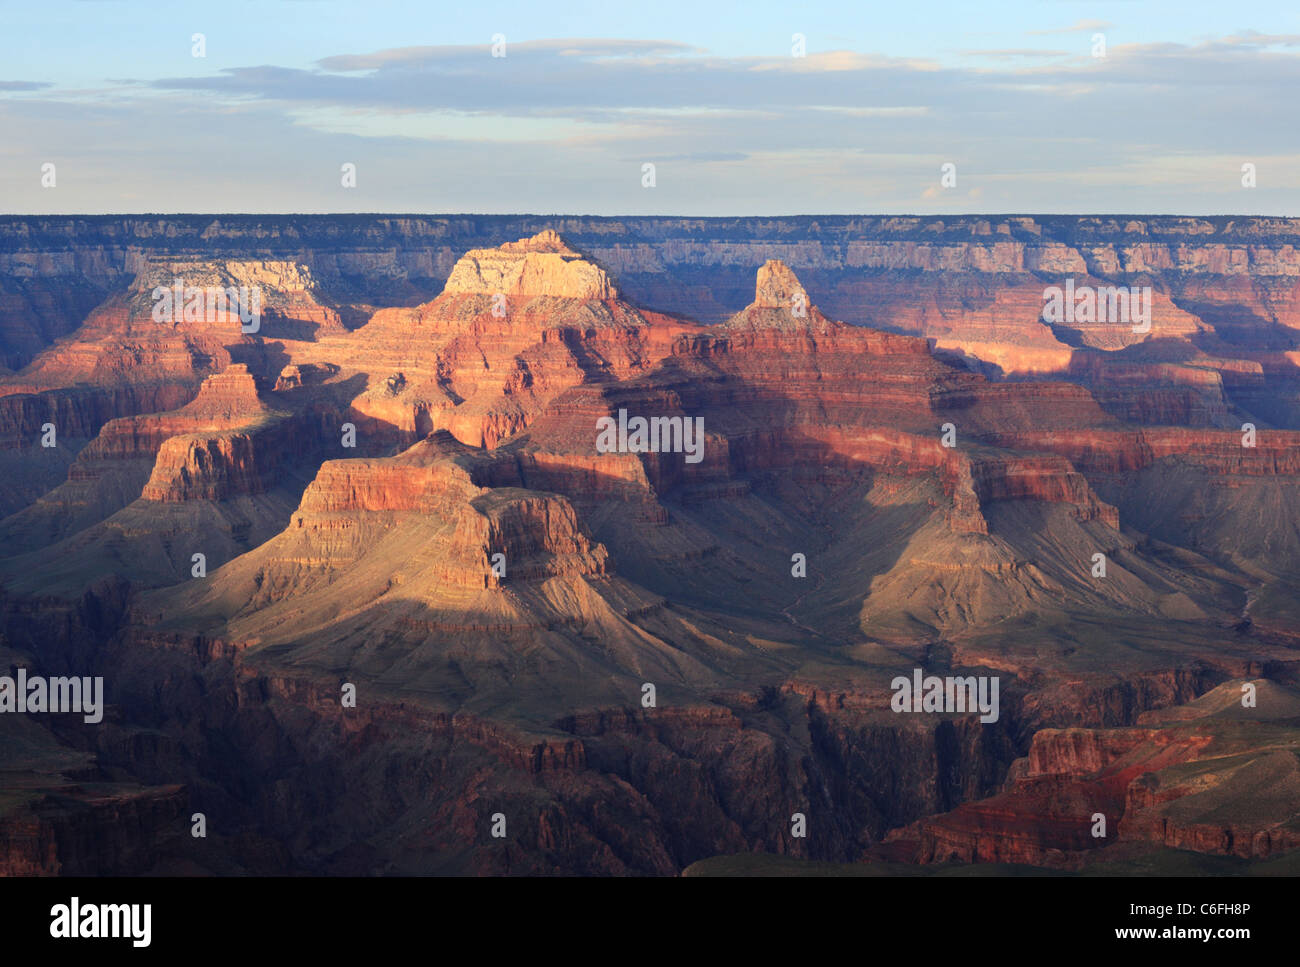 Brahma and Zoroaster Temples in the Grand Canyon accented by evening light Stock Photo